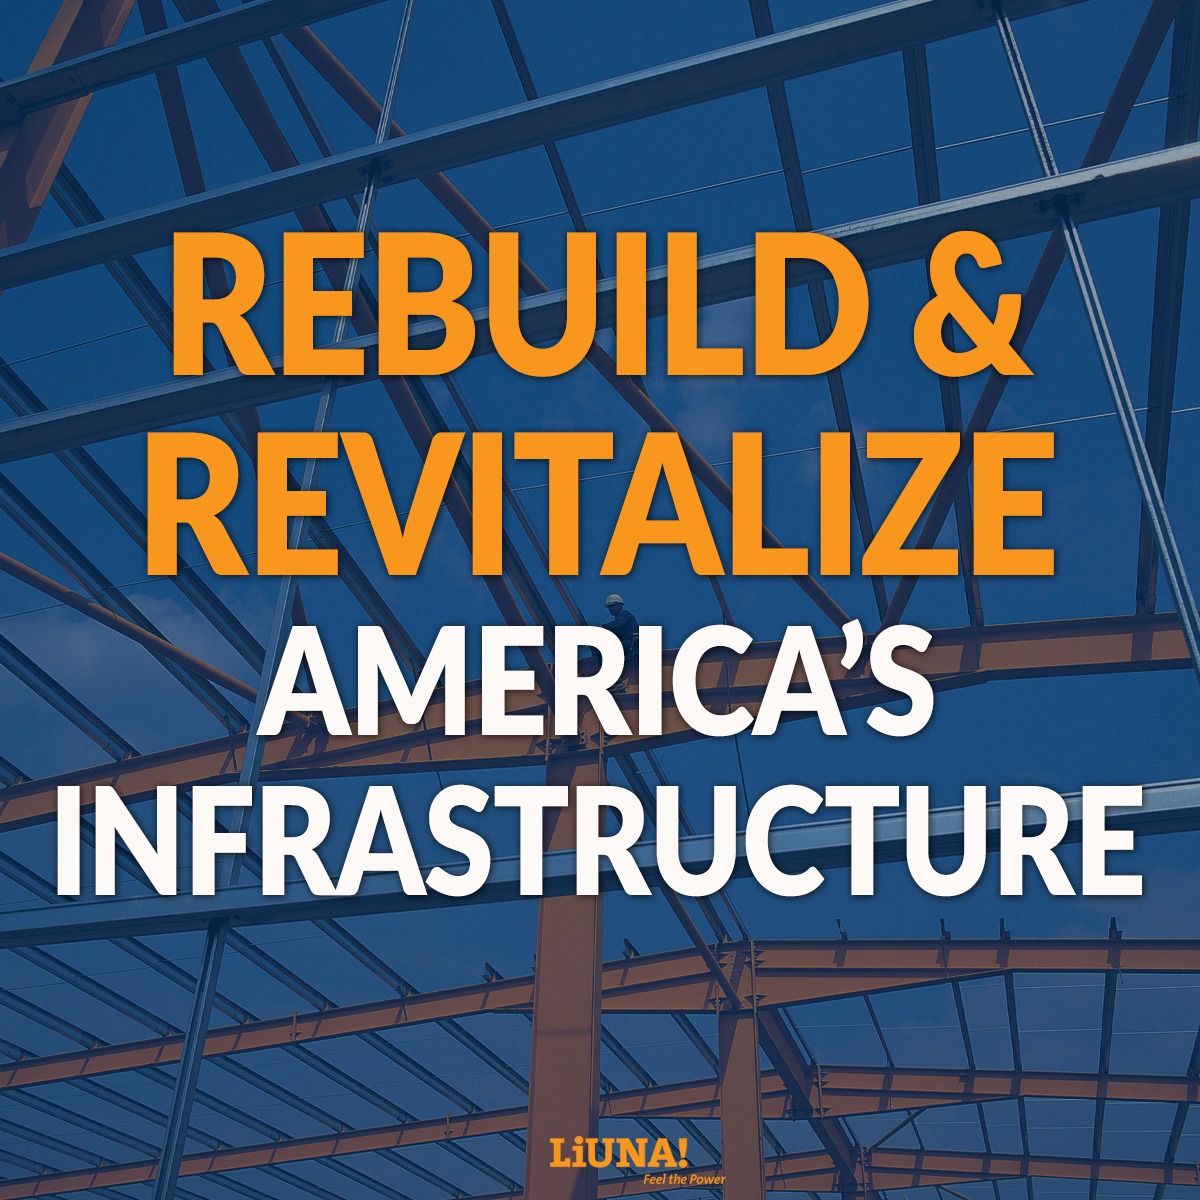 Thanks to President Biden & his Administration's Bipartisan Infrastructure Law, we have a once-in-a-generation infrastructure investment!

#LIUNA members are ready to REBUILD & REVITALIZE America's #infrastructure.

#POTUS #InfrastructureWeek #InfrastructureDecade #LIUNABuilds